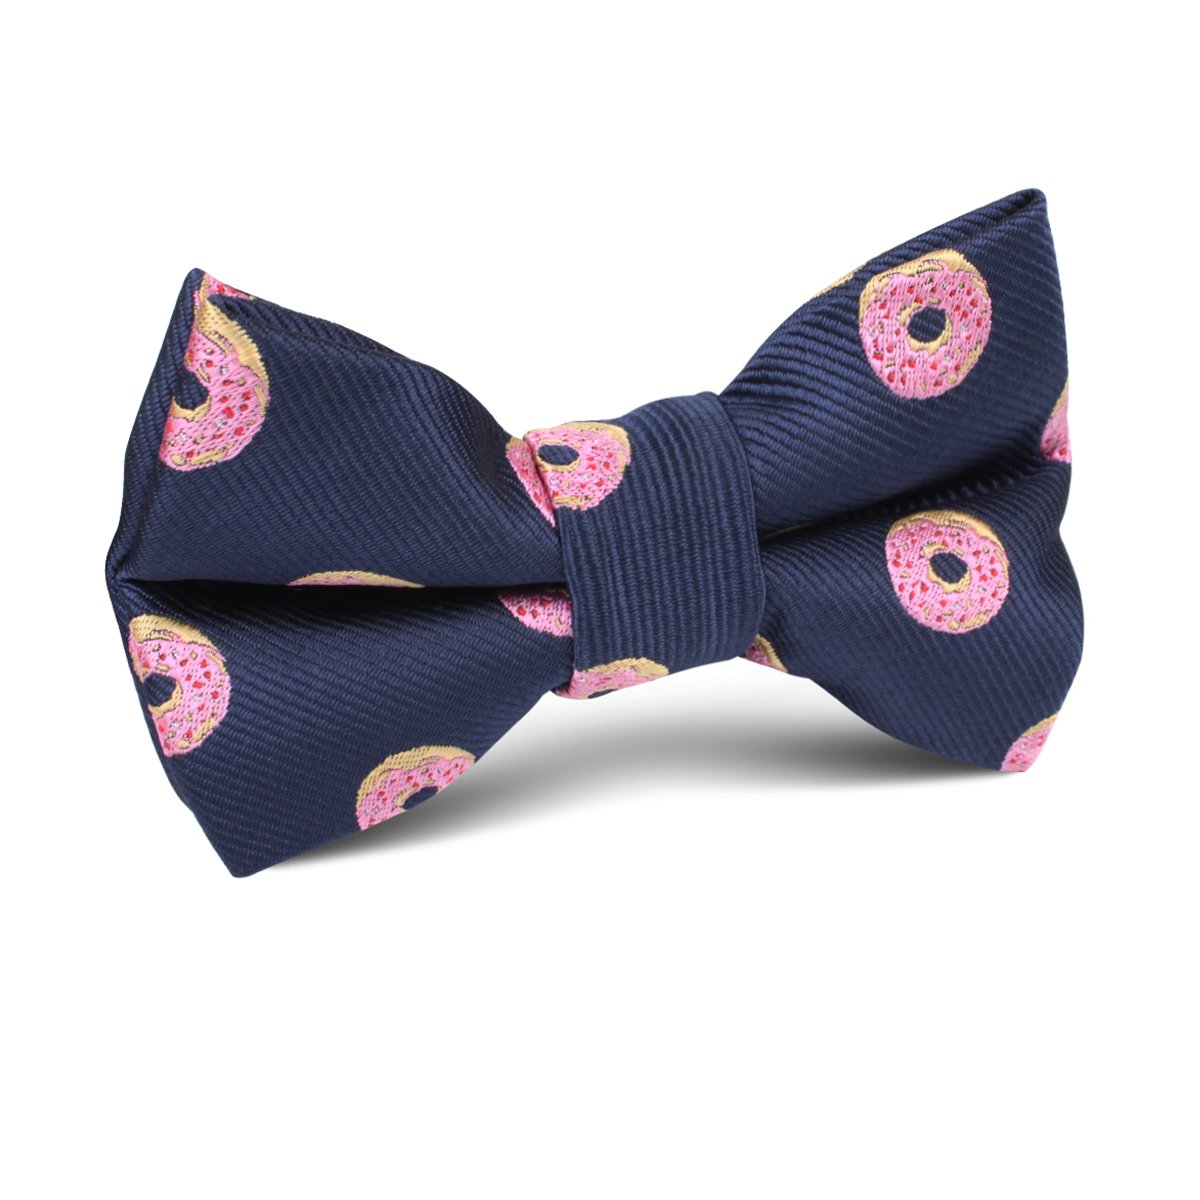 Boy's Navy Bow Tie with Pink Donuts, Kid's Size Donut Bowtie - H-Bomb ...